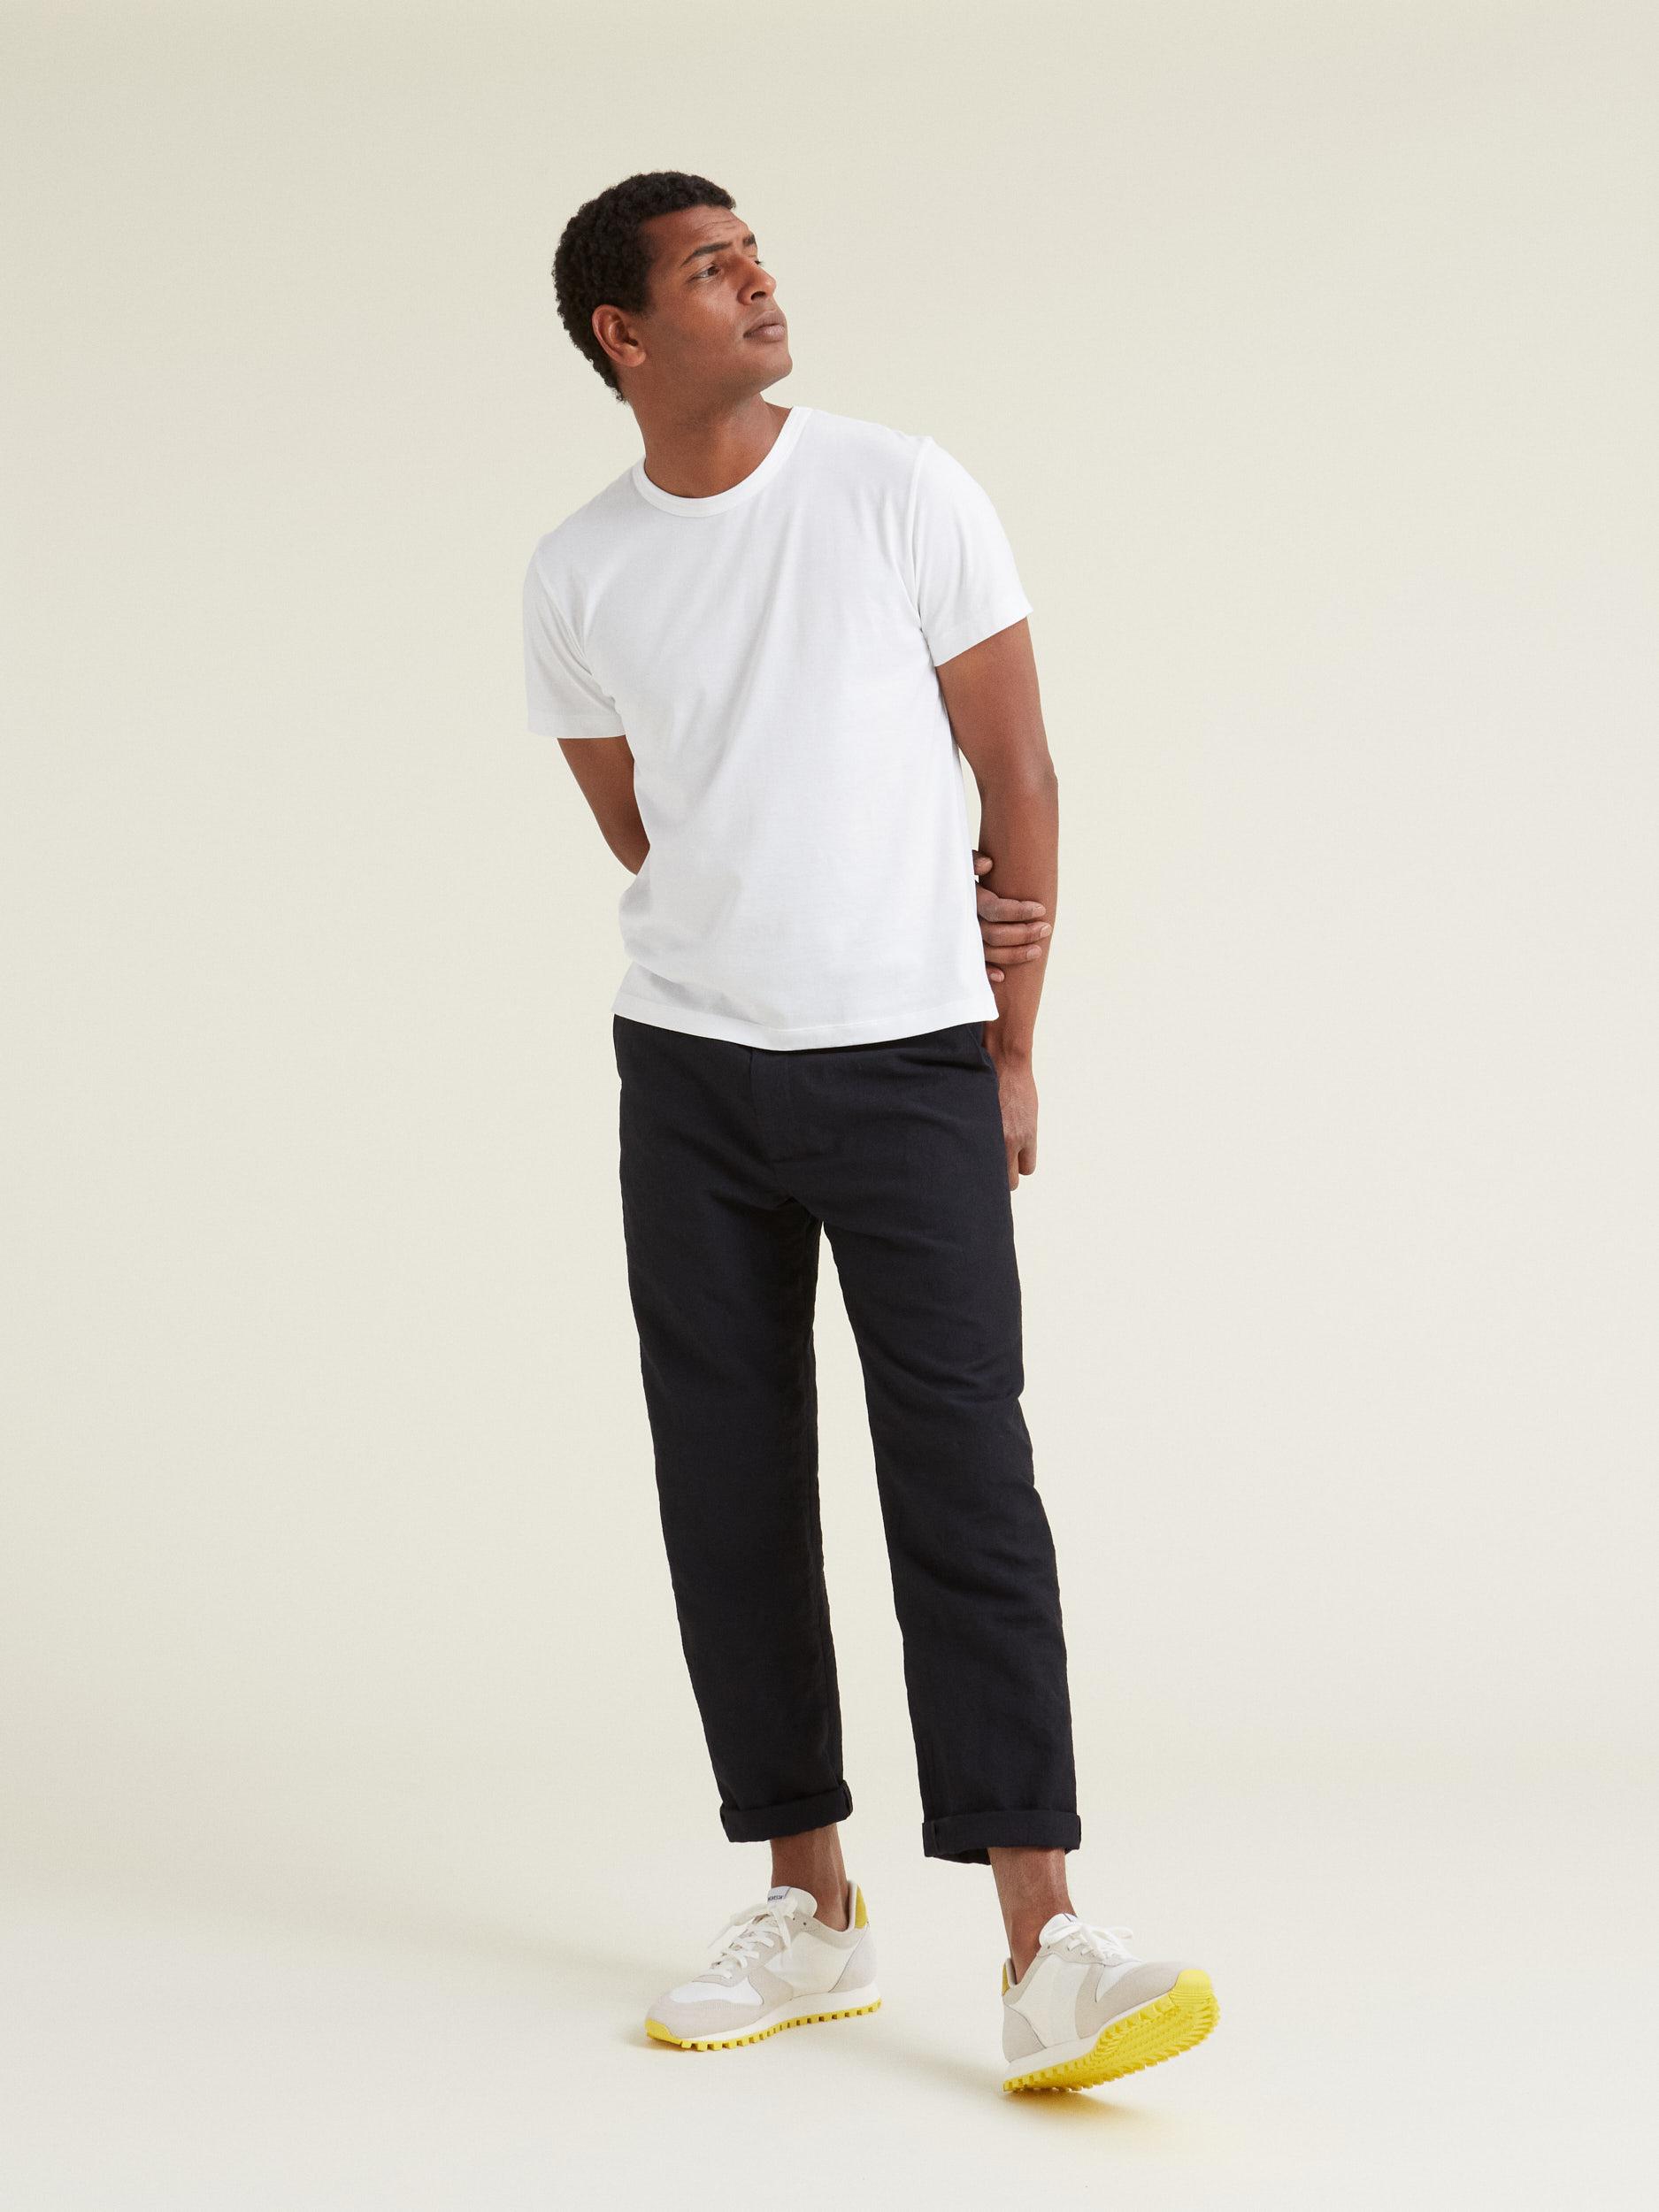 The Over/Under Easy Pant – HATCH Collection